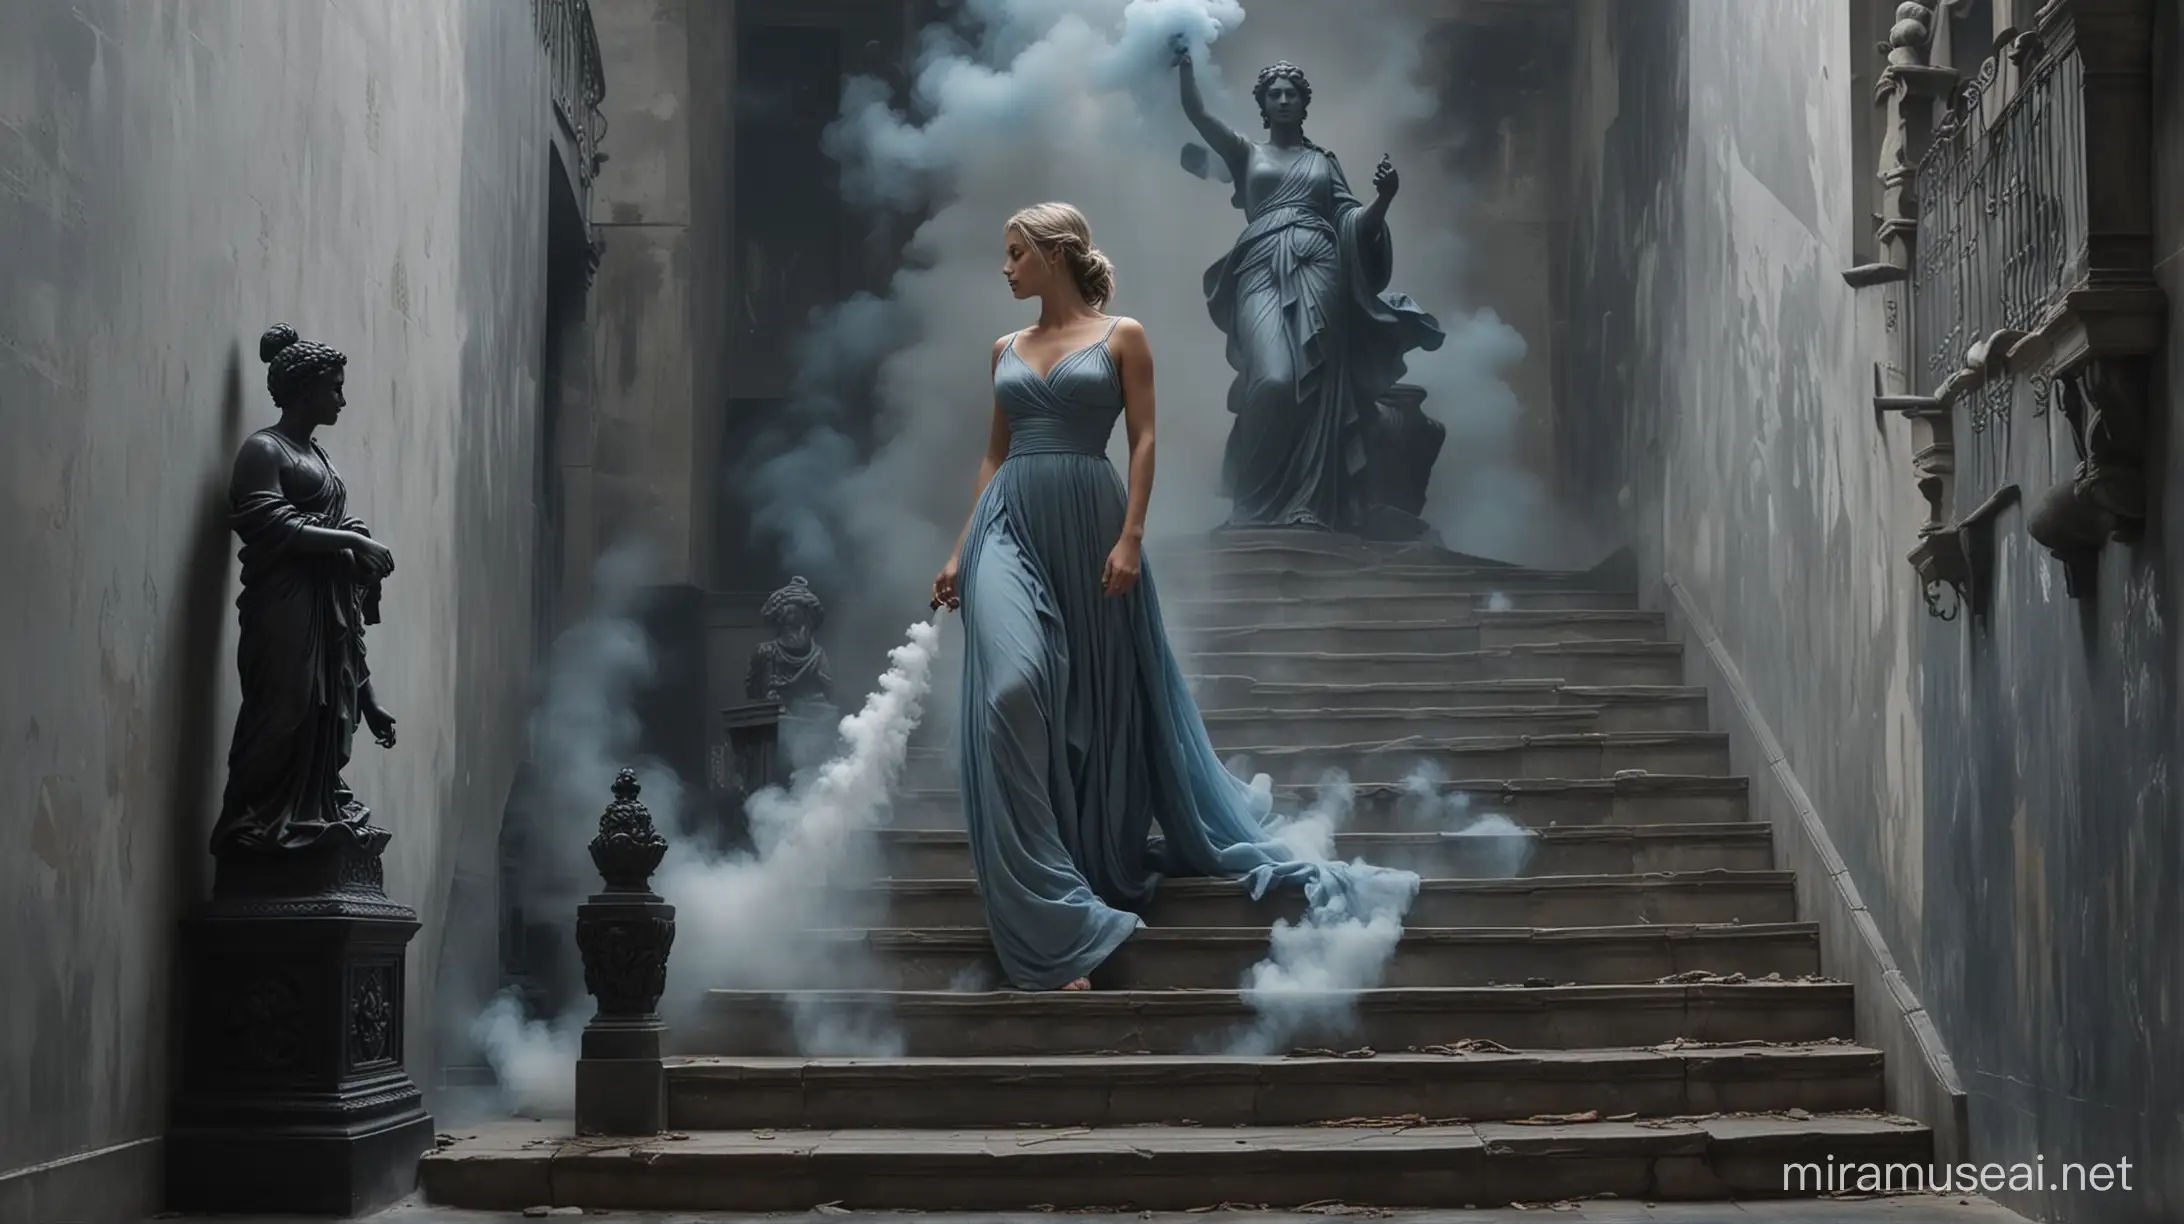 Stoicism, motivation, stoic muscular FIGURE of a woman on
inside she comes down the stairs next to the stairs there are kneeling figures of statues behind her a blue streak of smoke comes out and the figure has a beautiful dress the painting is atmospheric and has gray and black colors. the walls are black, the stairs are black, the statues are grey
Prześlij opinię